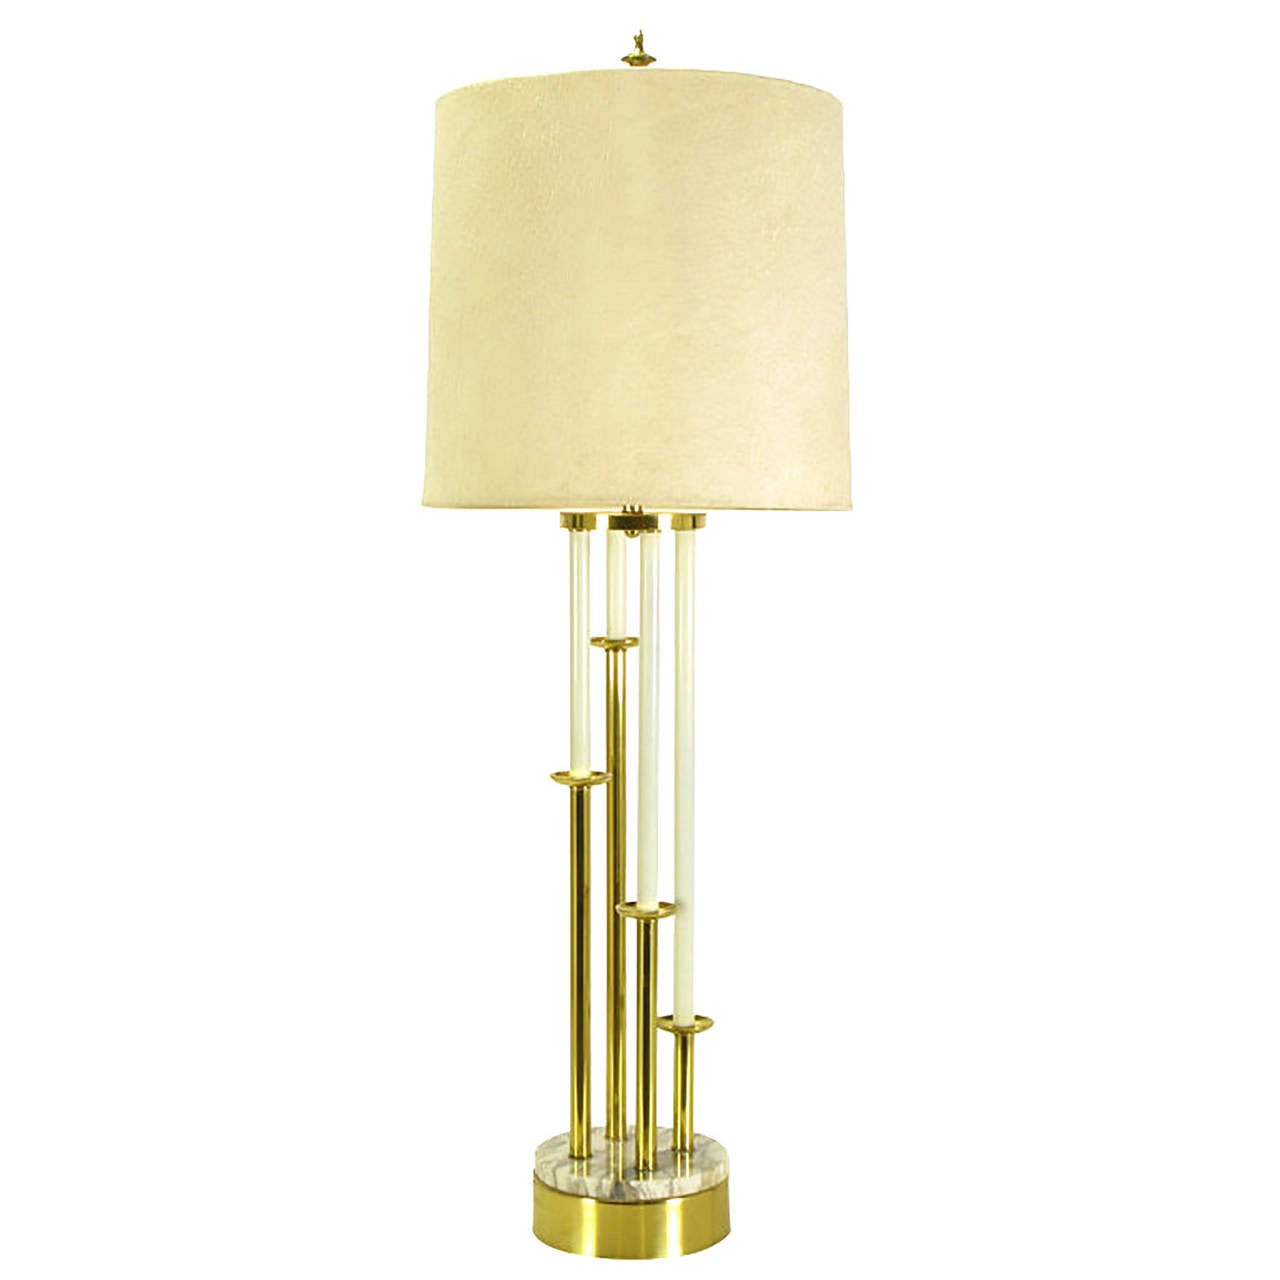 50 inch tall Rembrandt lighting table lamp. Sculptural stepped brass candlesticks on a round Carrara marble and brass base. Ivory lacquered 